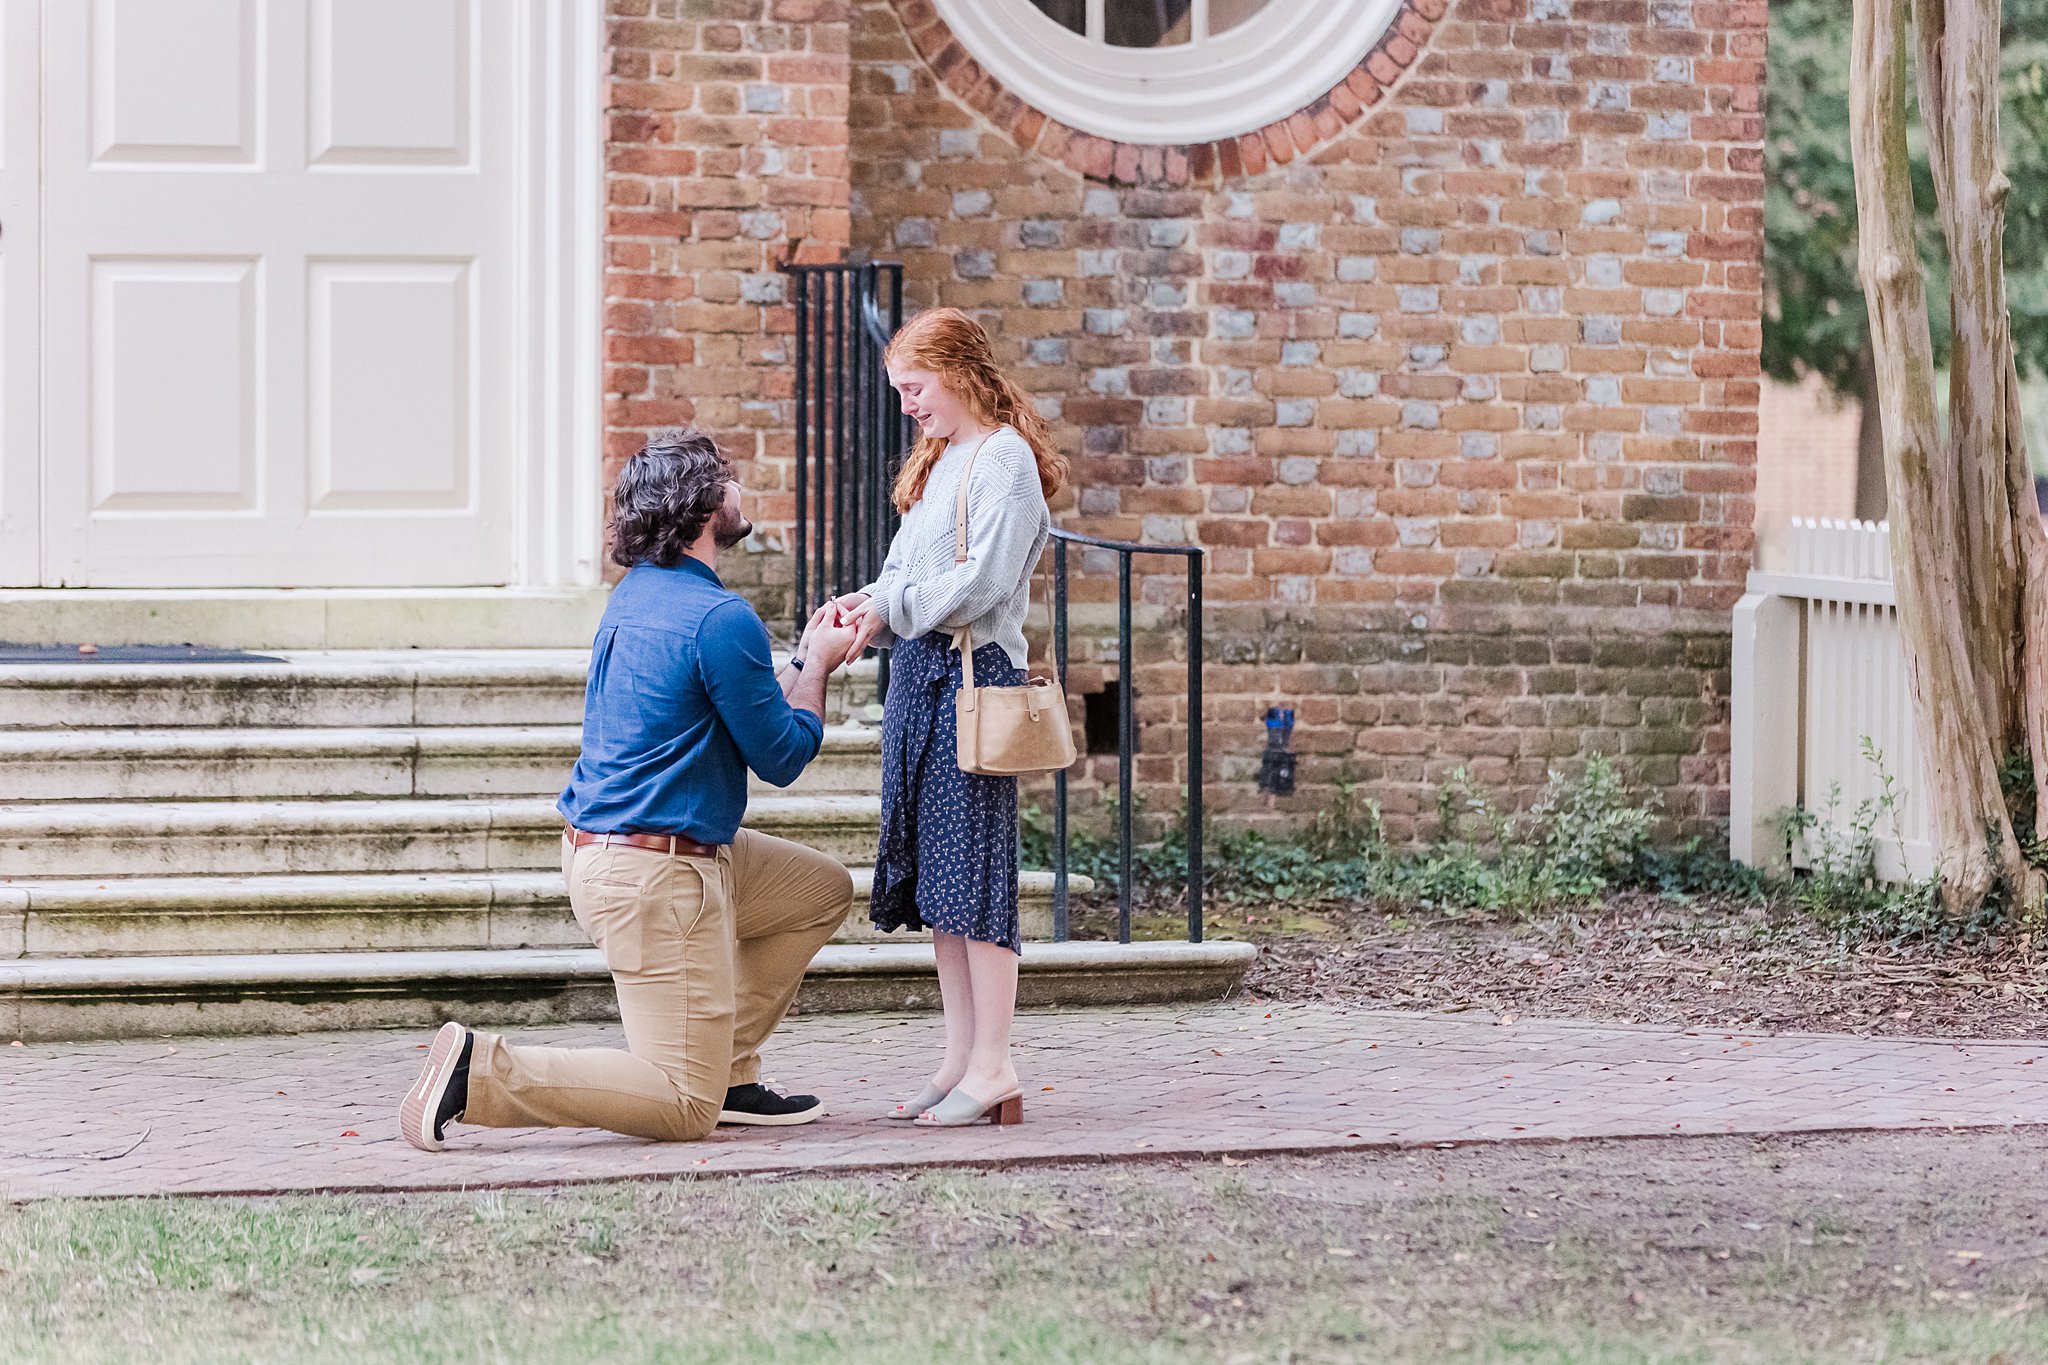 William & Mary alum on one knee proposing in front of Wren Chapel